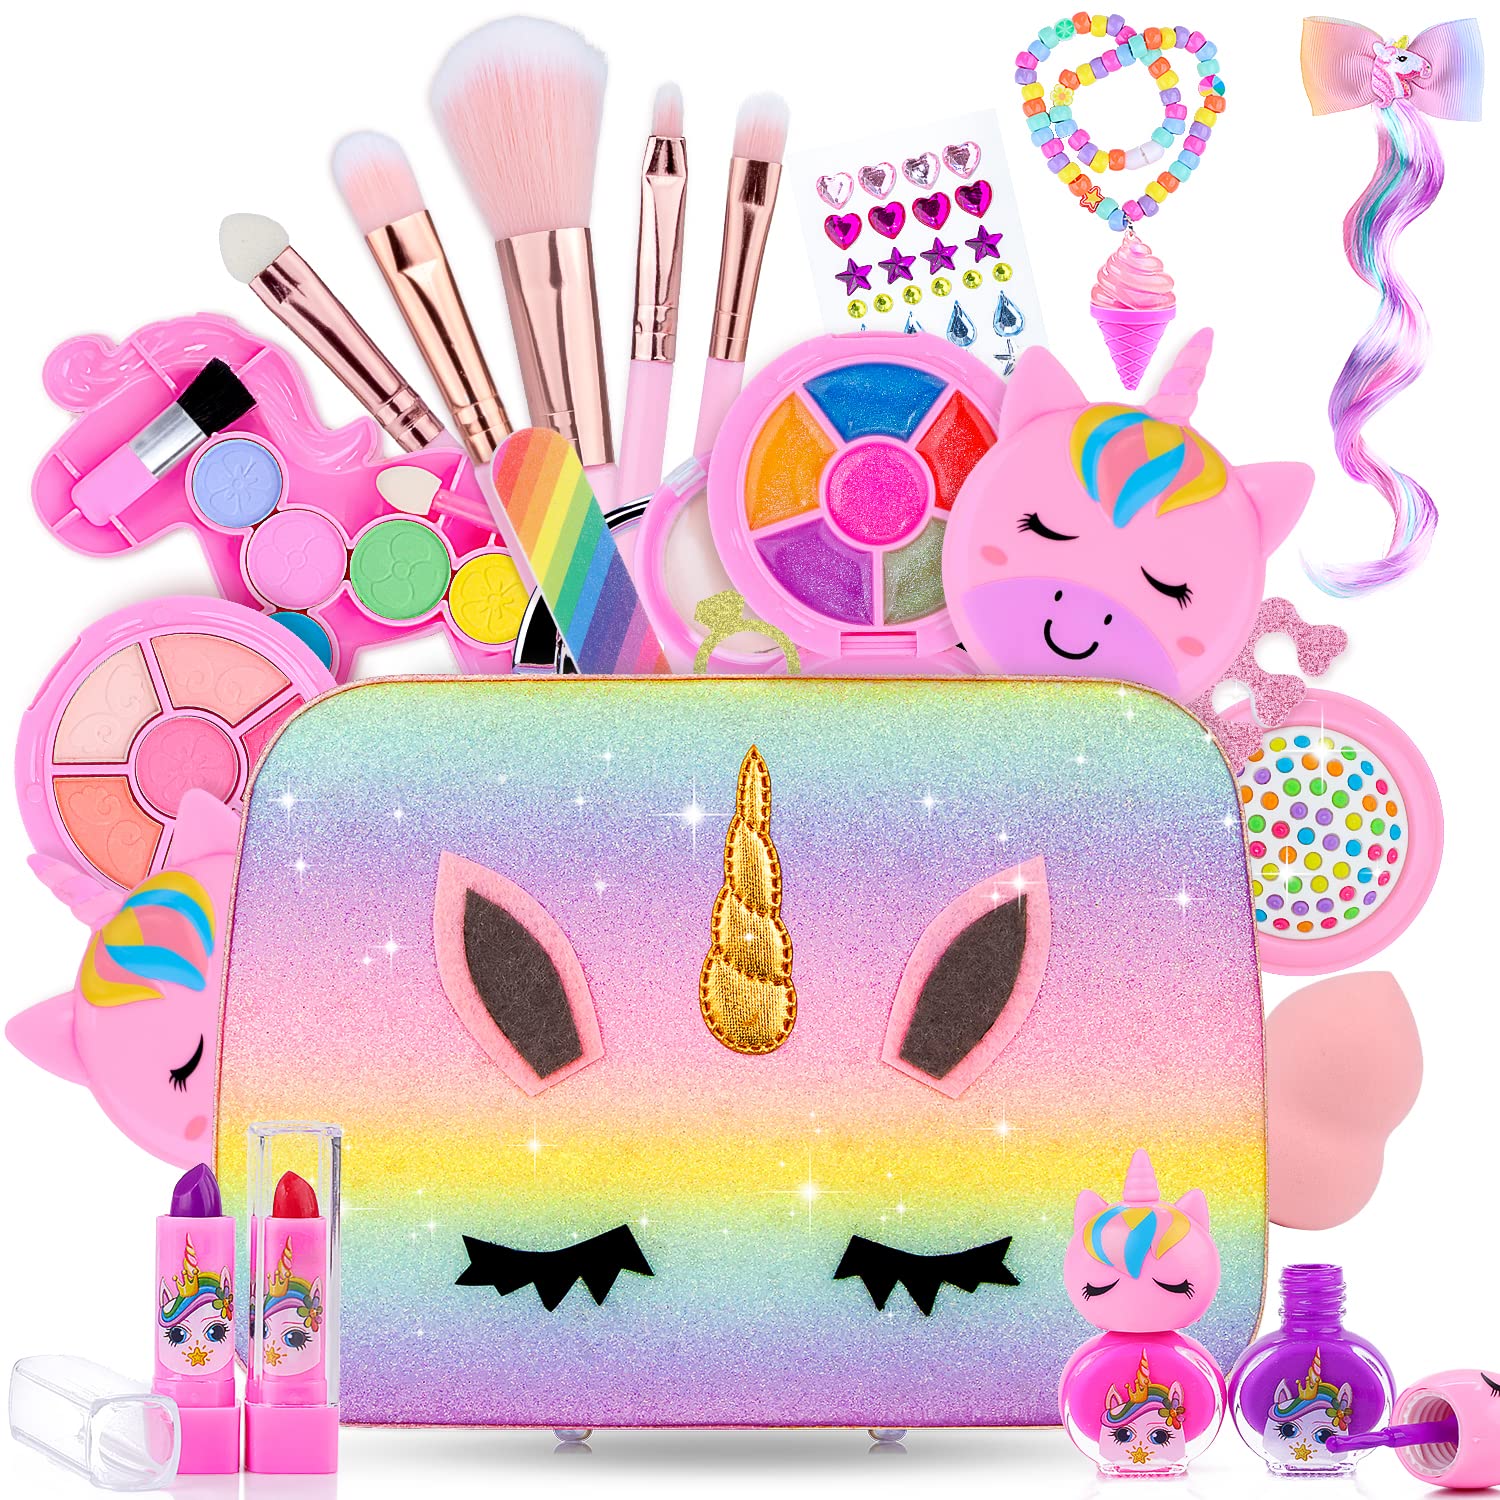 MagicToiee Brithday Gifts Unicorn Makeup Kit for Kids, Washable Cosmetic Set as Princess Birthday Gift Toy with Bag, Children Cosmetic Beauty Set for Girls Age 4 5 6 7 8 9 10 Year Old